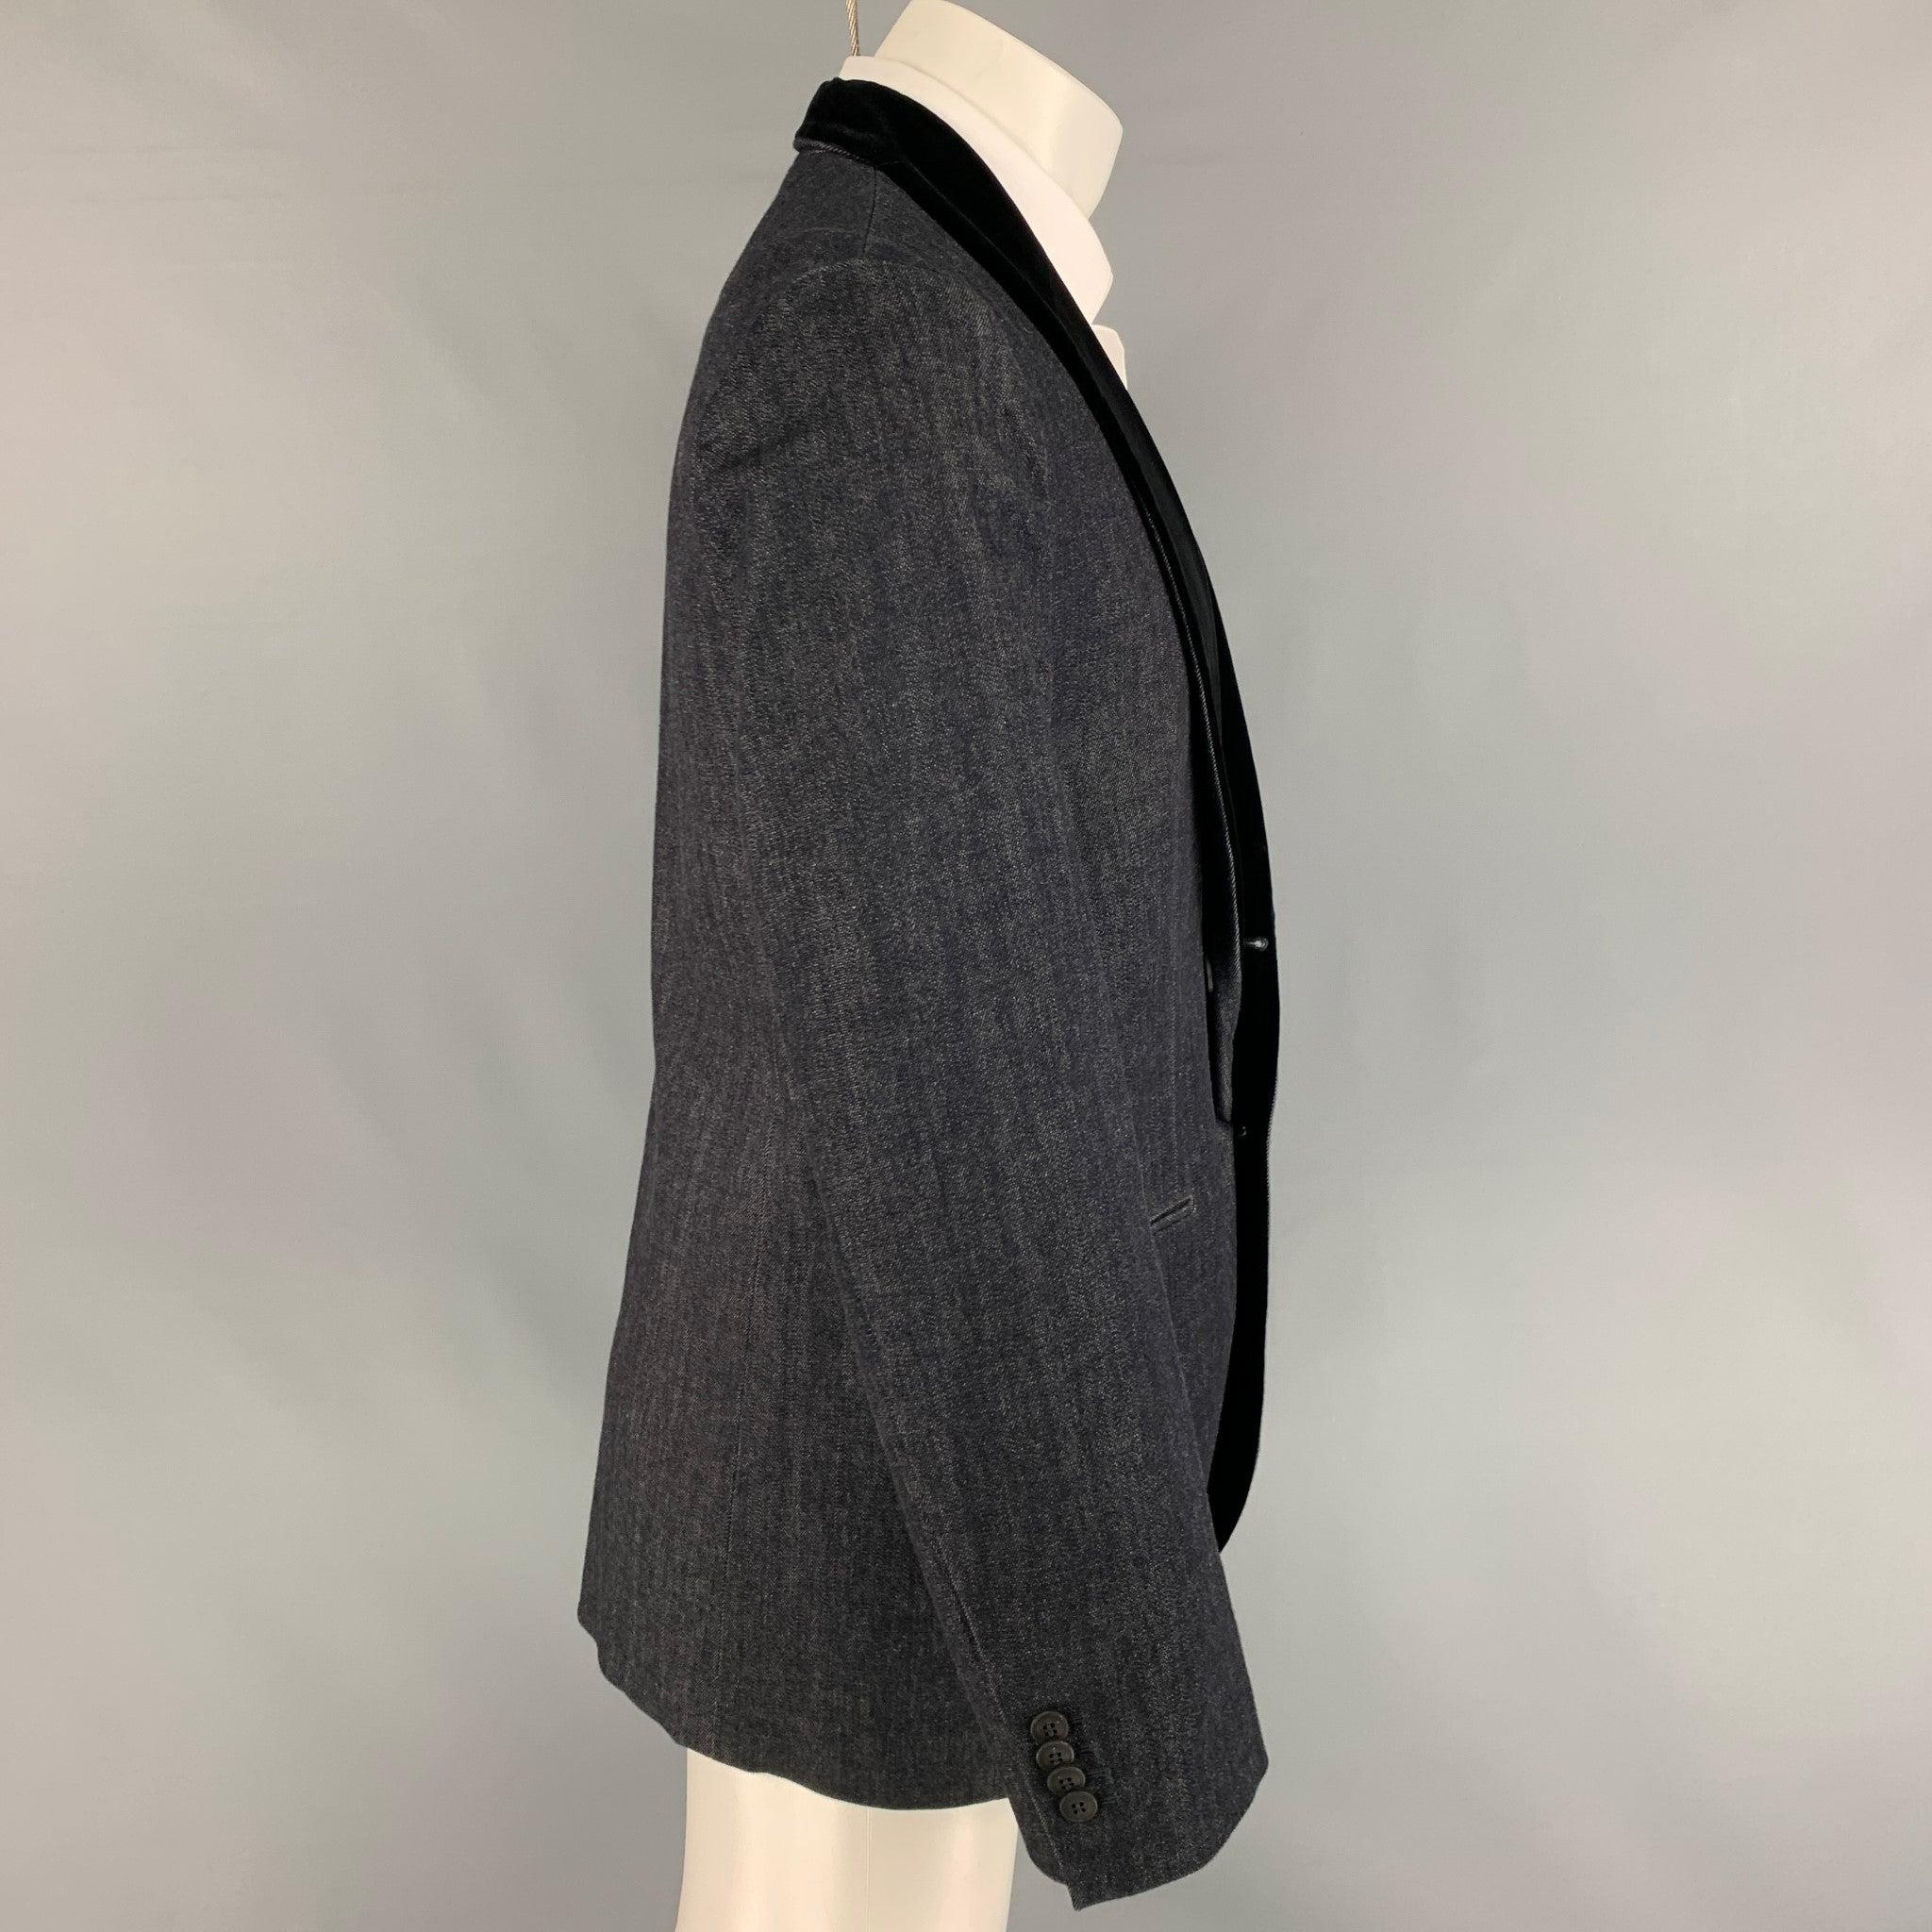 GIORGIO ARMANI sport coat comes in a indigo cotton / cashmere featuring a velvet shawl collar, slit pockets, and a double button closure. Made in Italy.
Very Good
Pre-Owned Condition.  

Marked:   54 

Measurements: 
 
Shoulder: 18 inches  Chest: 44